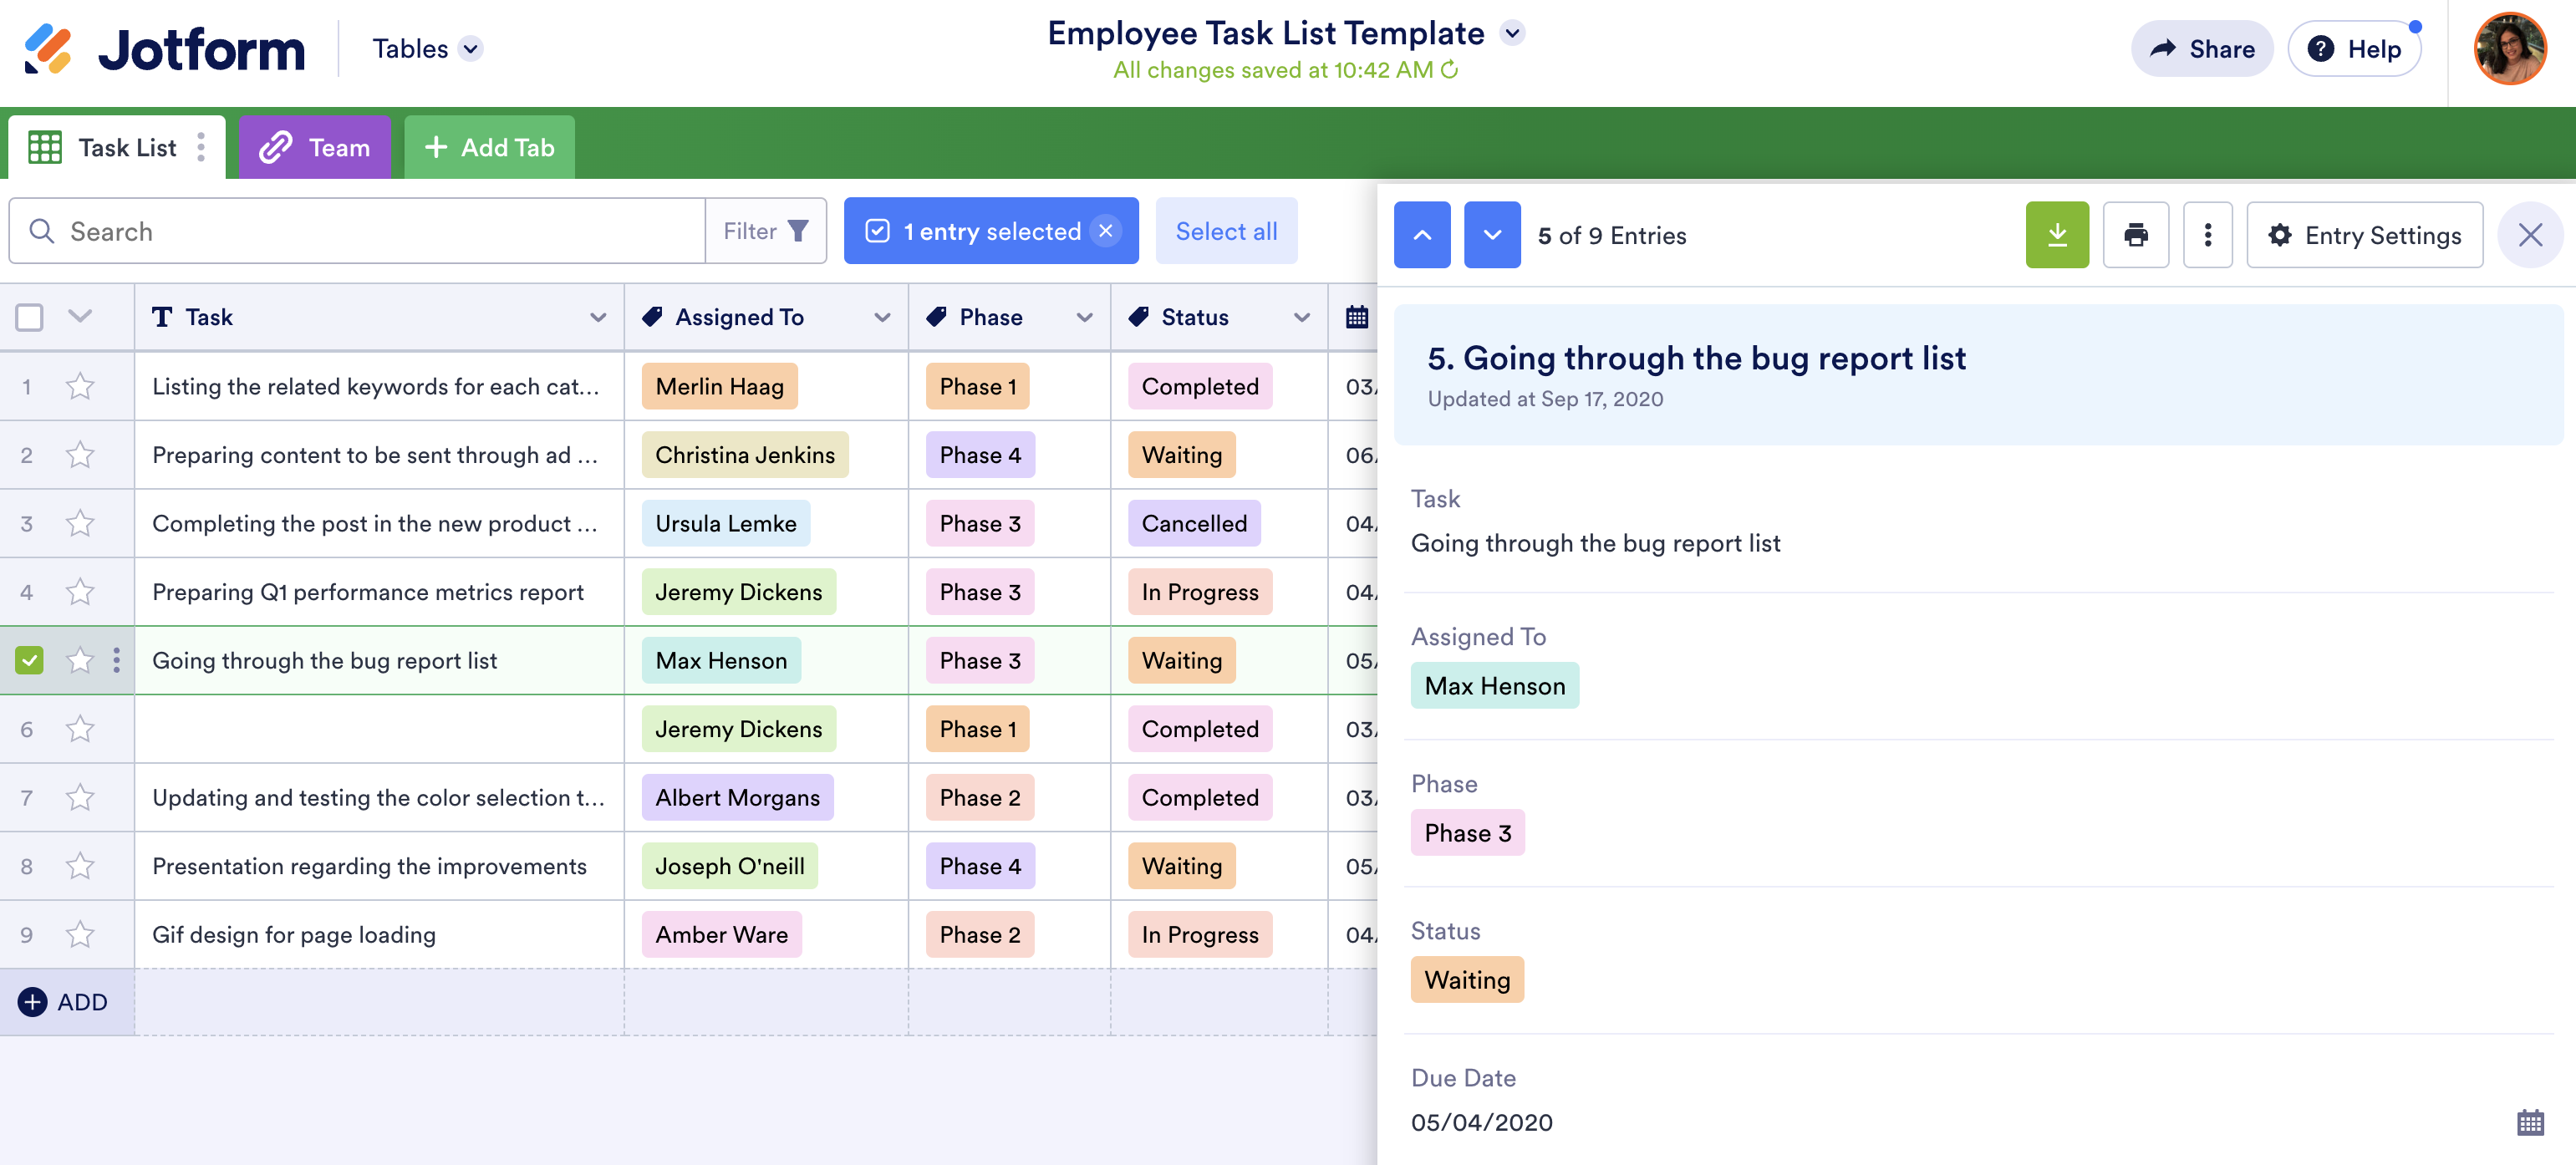 Screenshot of Employee Task List Template in Jotform Tables Viewing Entry 5